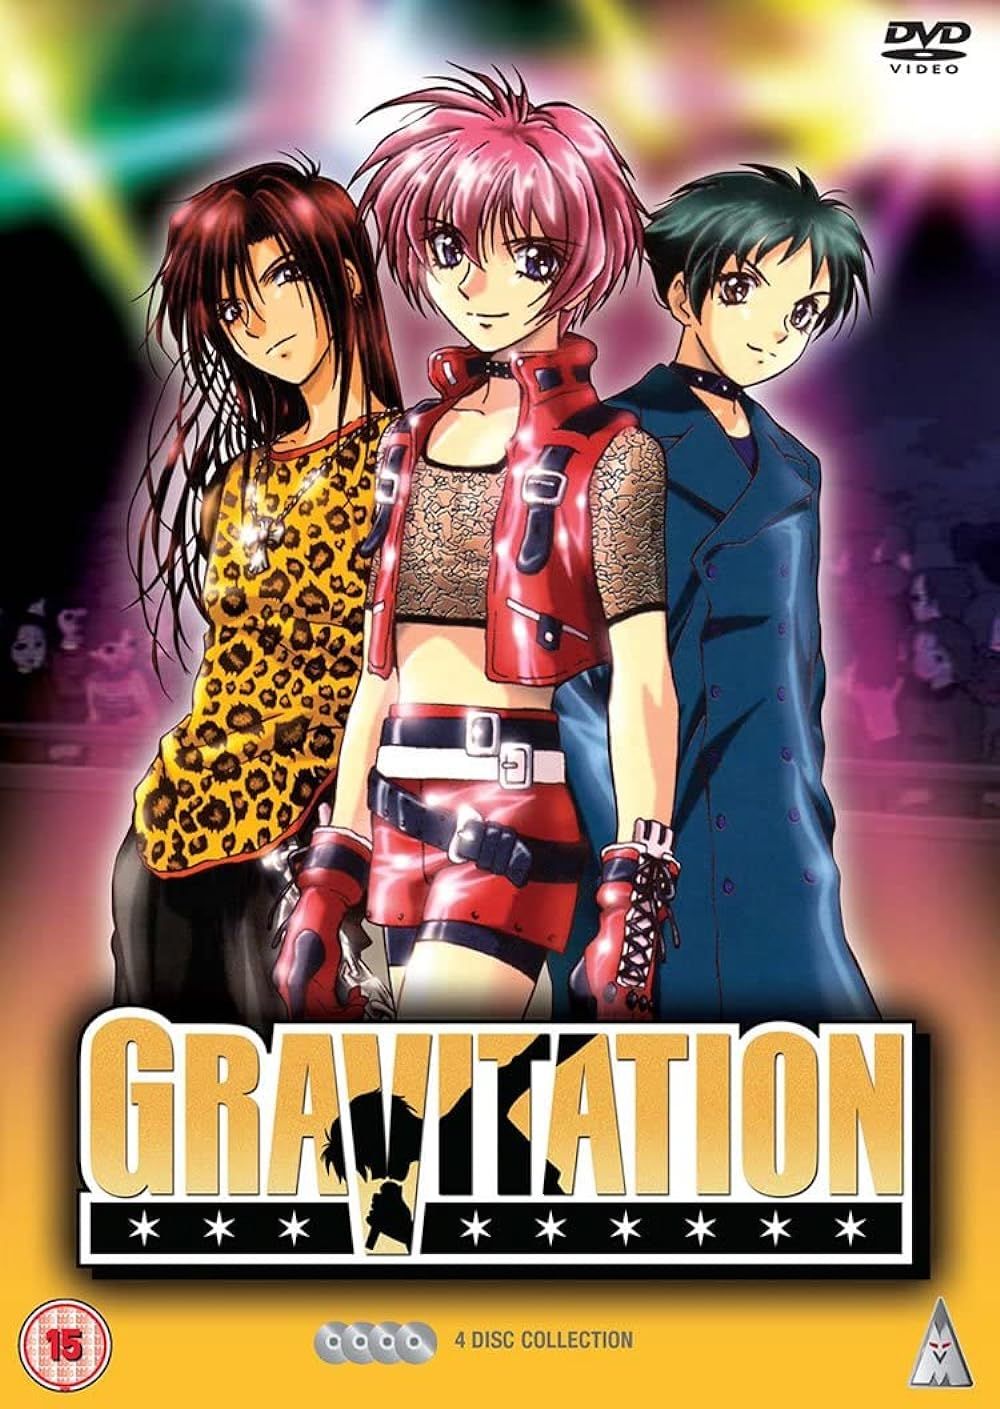 The Cast on the Gravitation DVD Promo